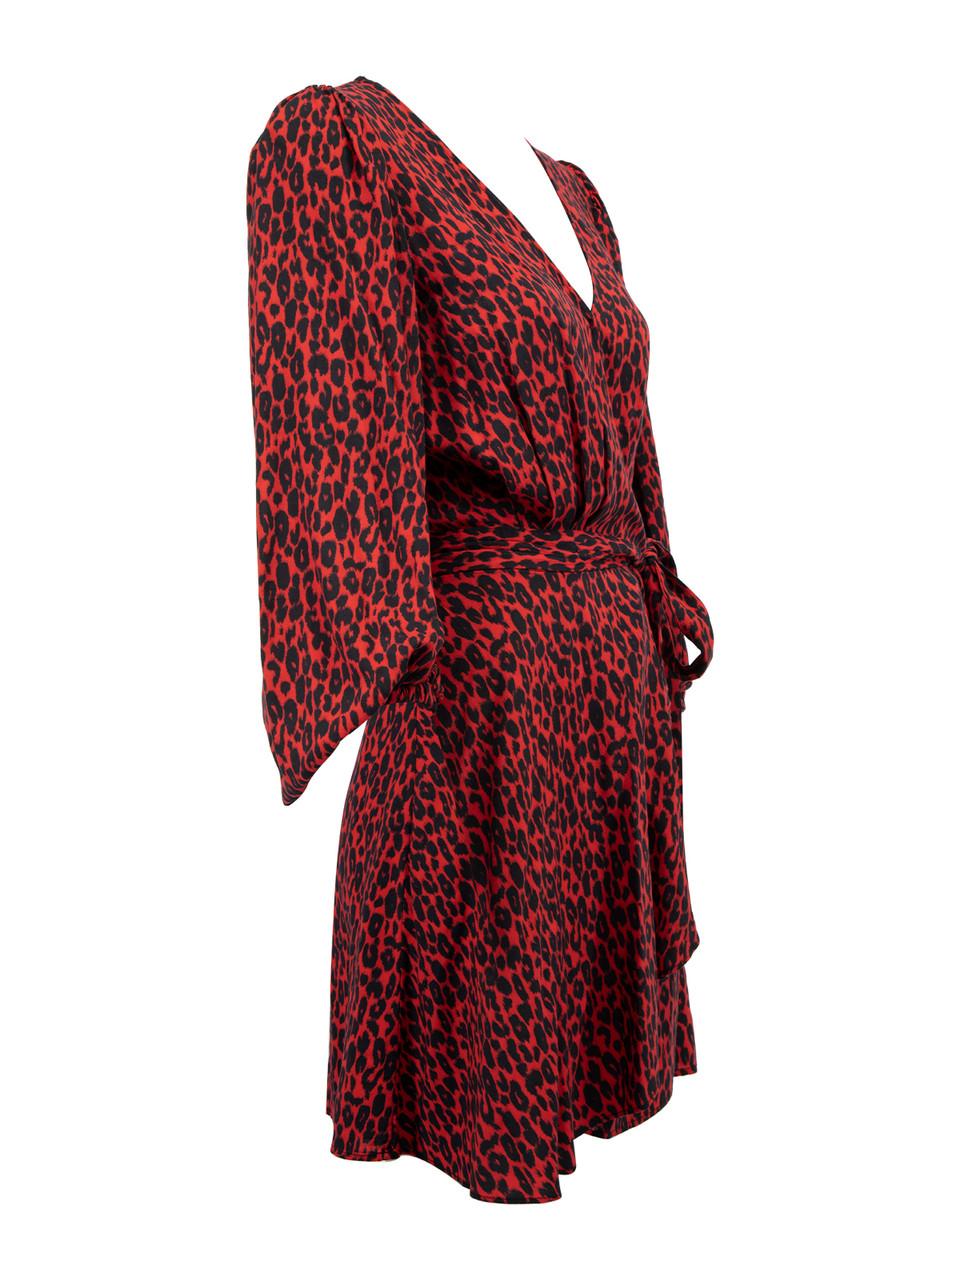 CONDITION is Never worn. No visible wear to dress is evident on this used Iro resale item. 
 
 Details
 Red and Black
 Rayon
 Wrap dress
 Leopard print
 Long bishop sleeves
 V neckline
 Mini length
 Hook and eye on chest
 Button on waistline
 Tie